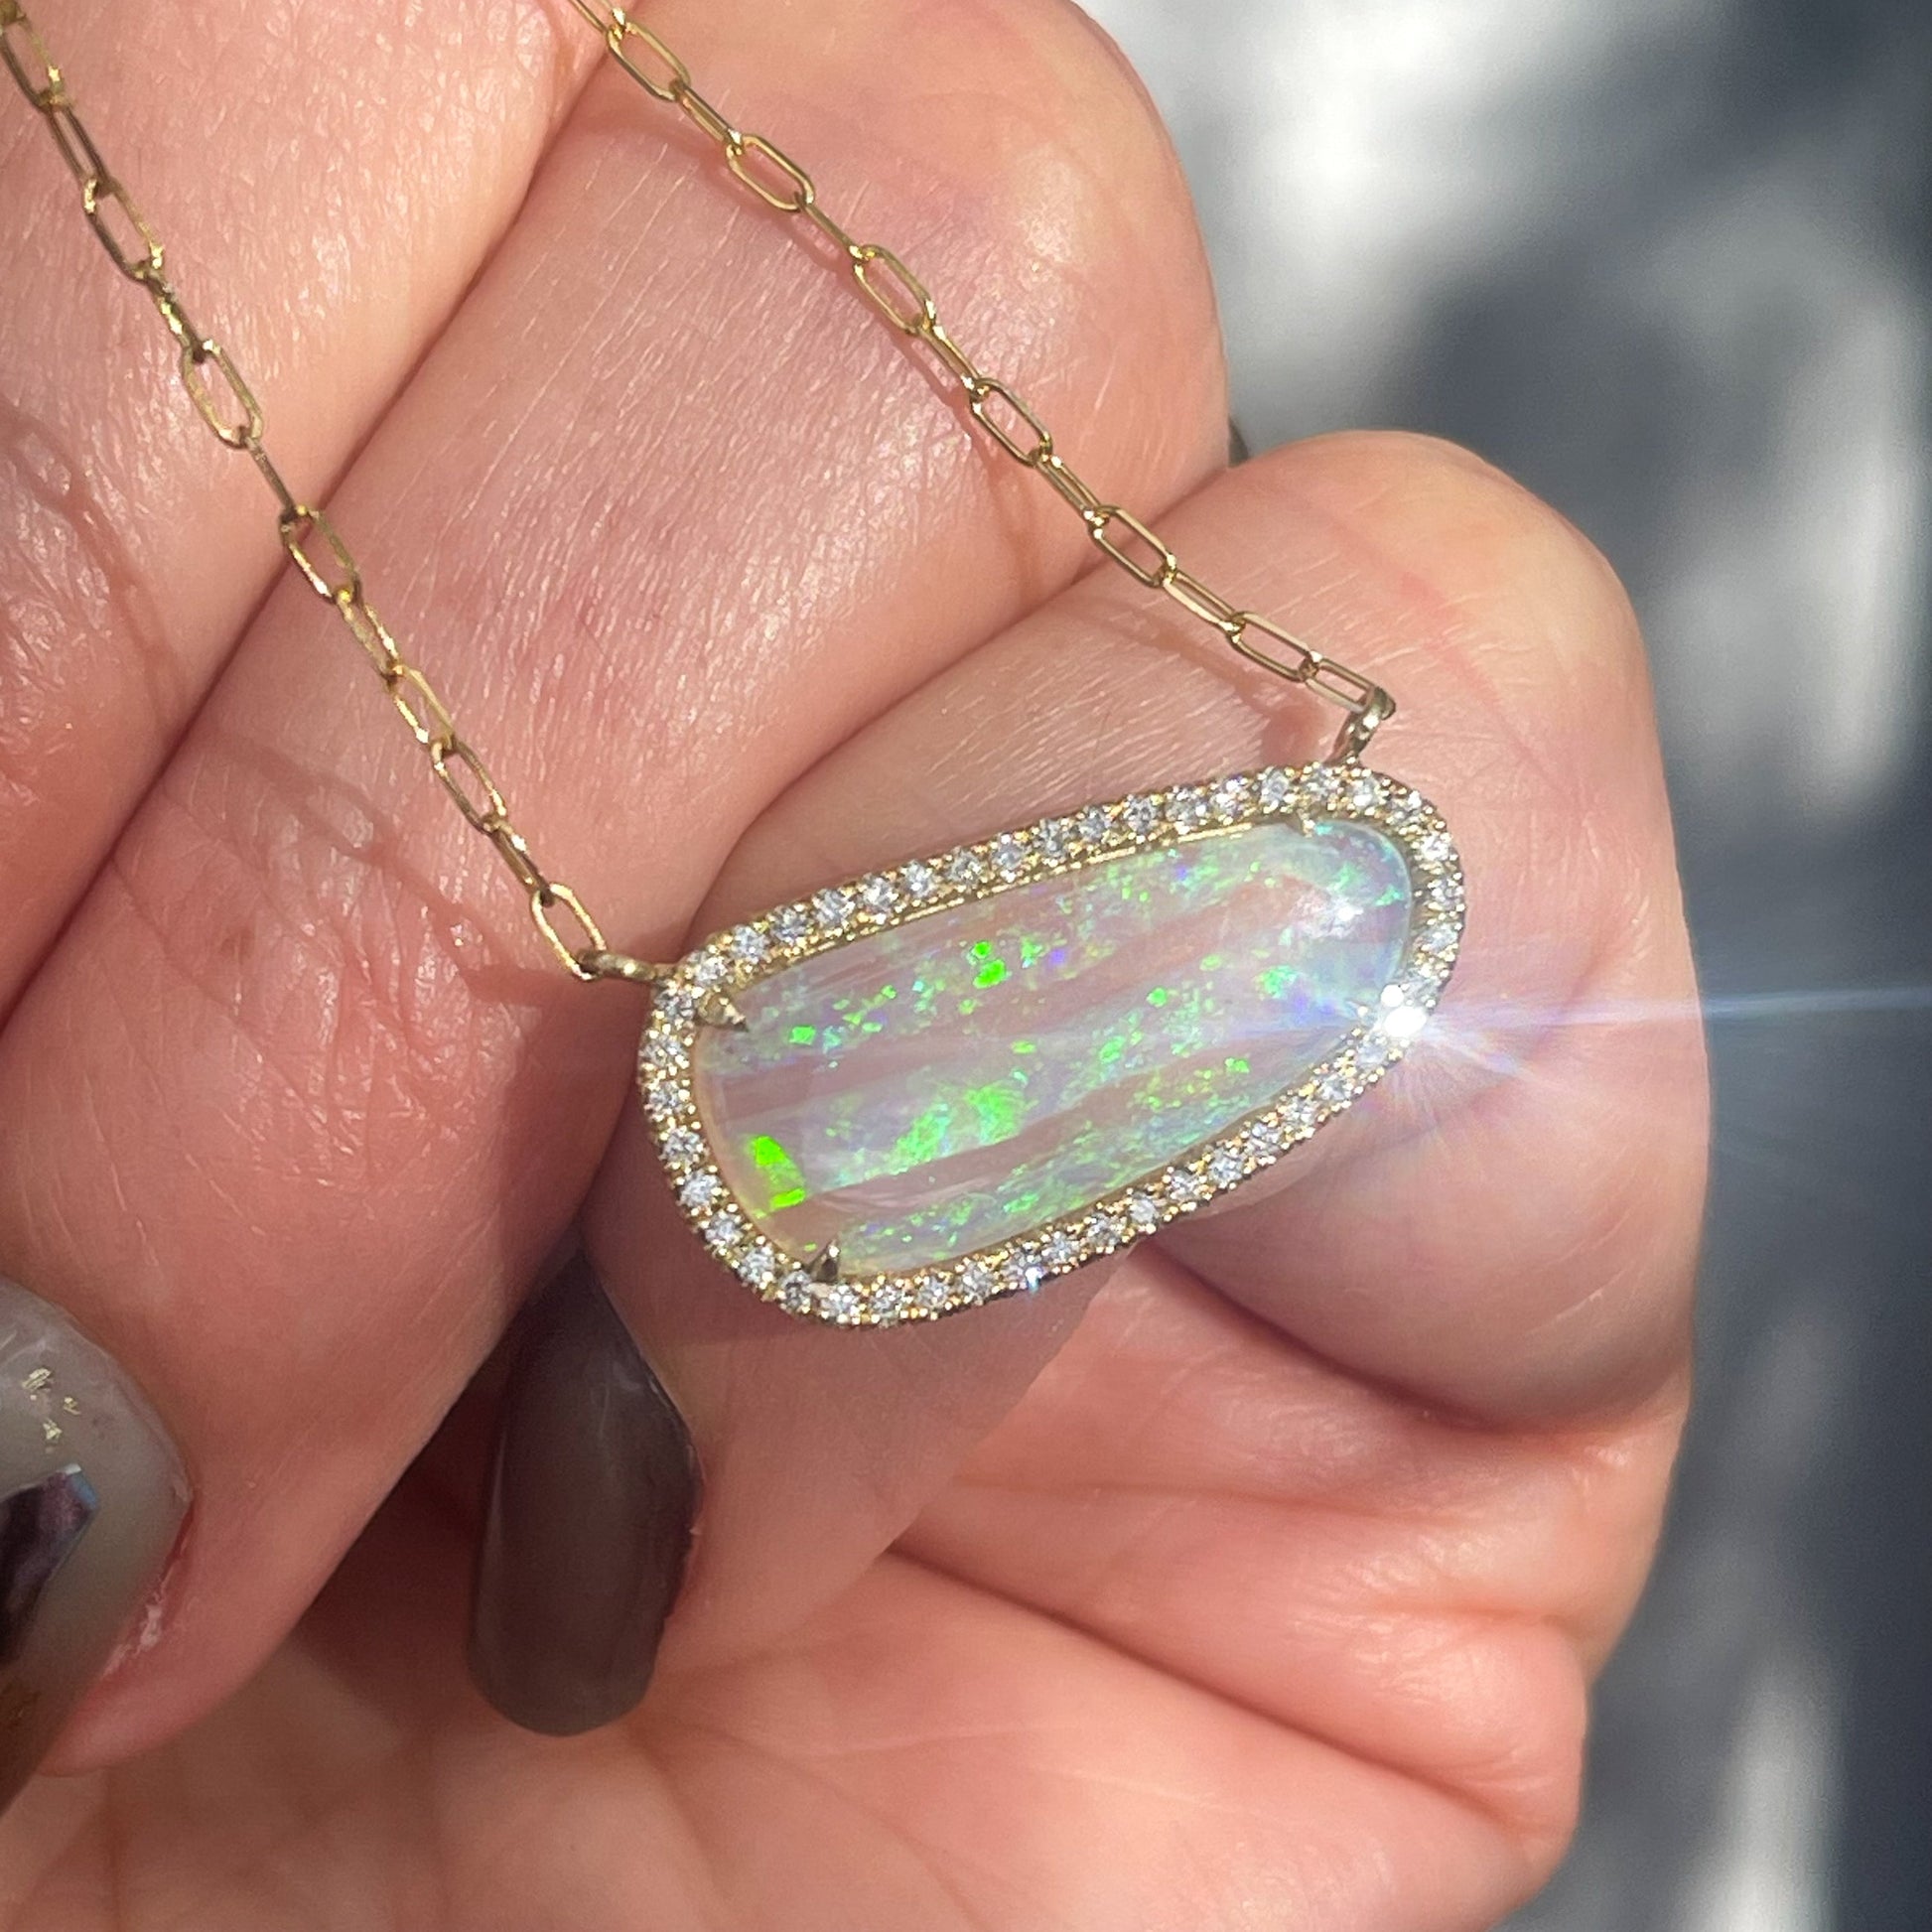 An Australian Opal Necklace by NIXIN Jewelry with a diamond halo around a Crystal Opal. A unique opal necklace.